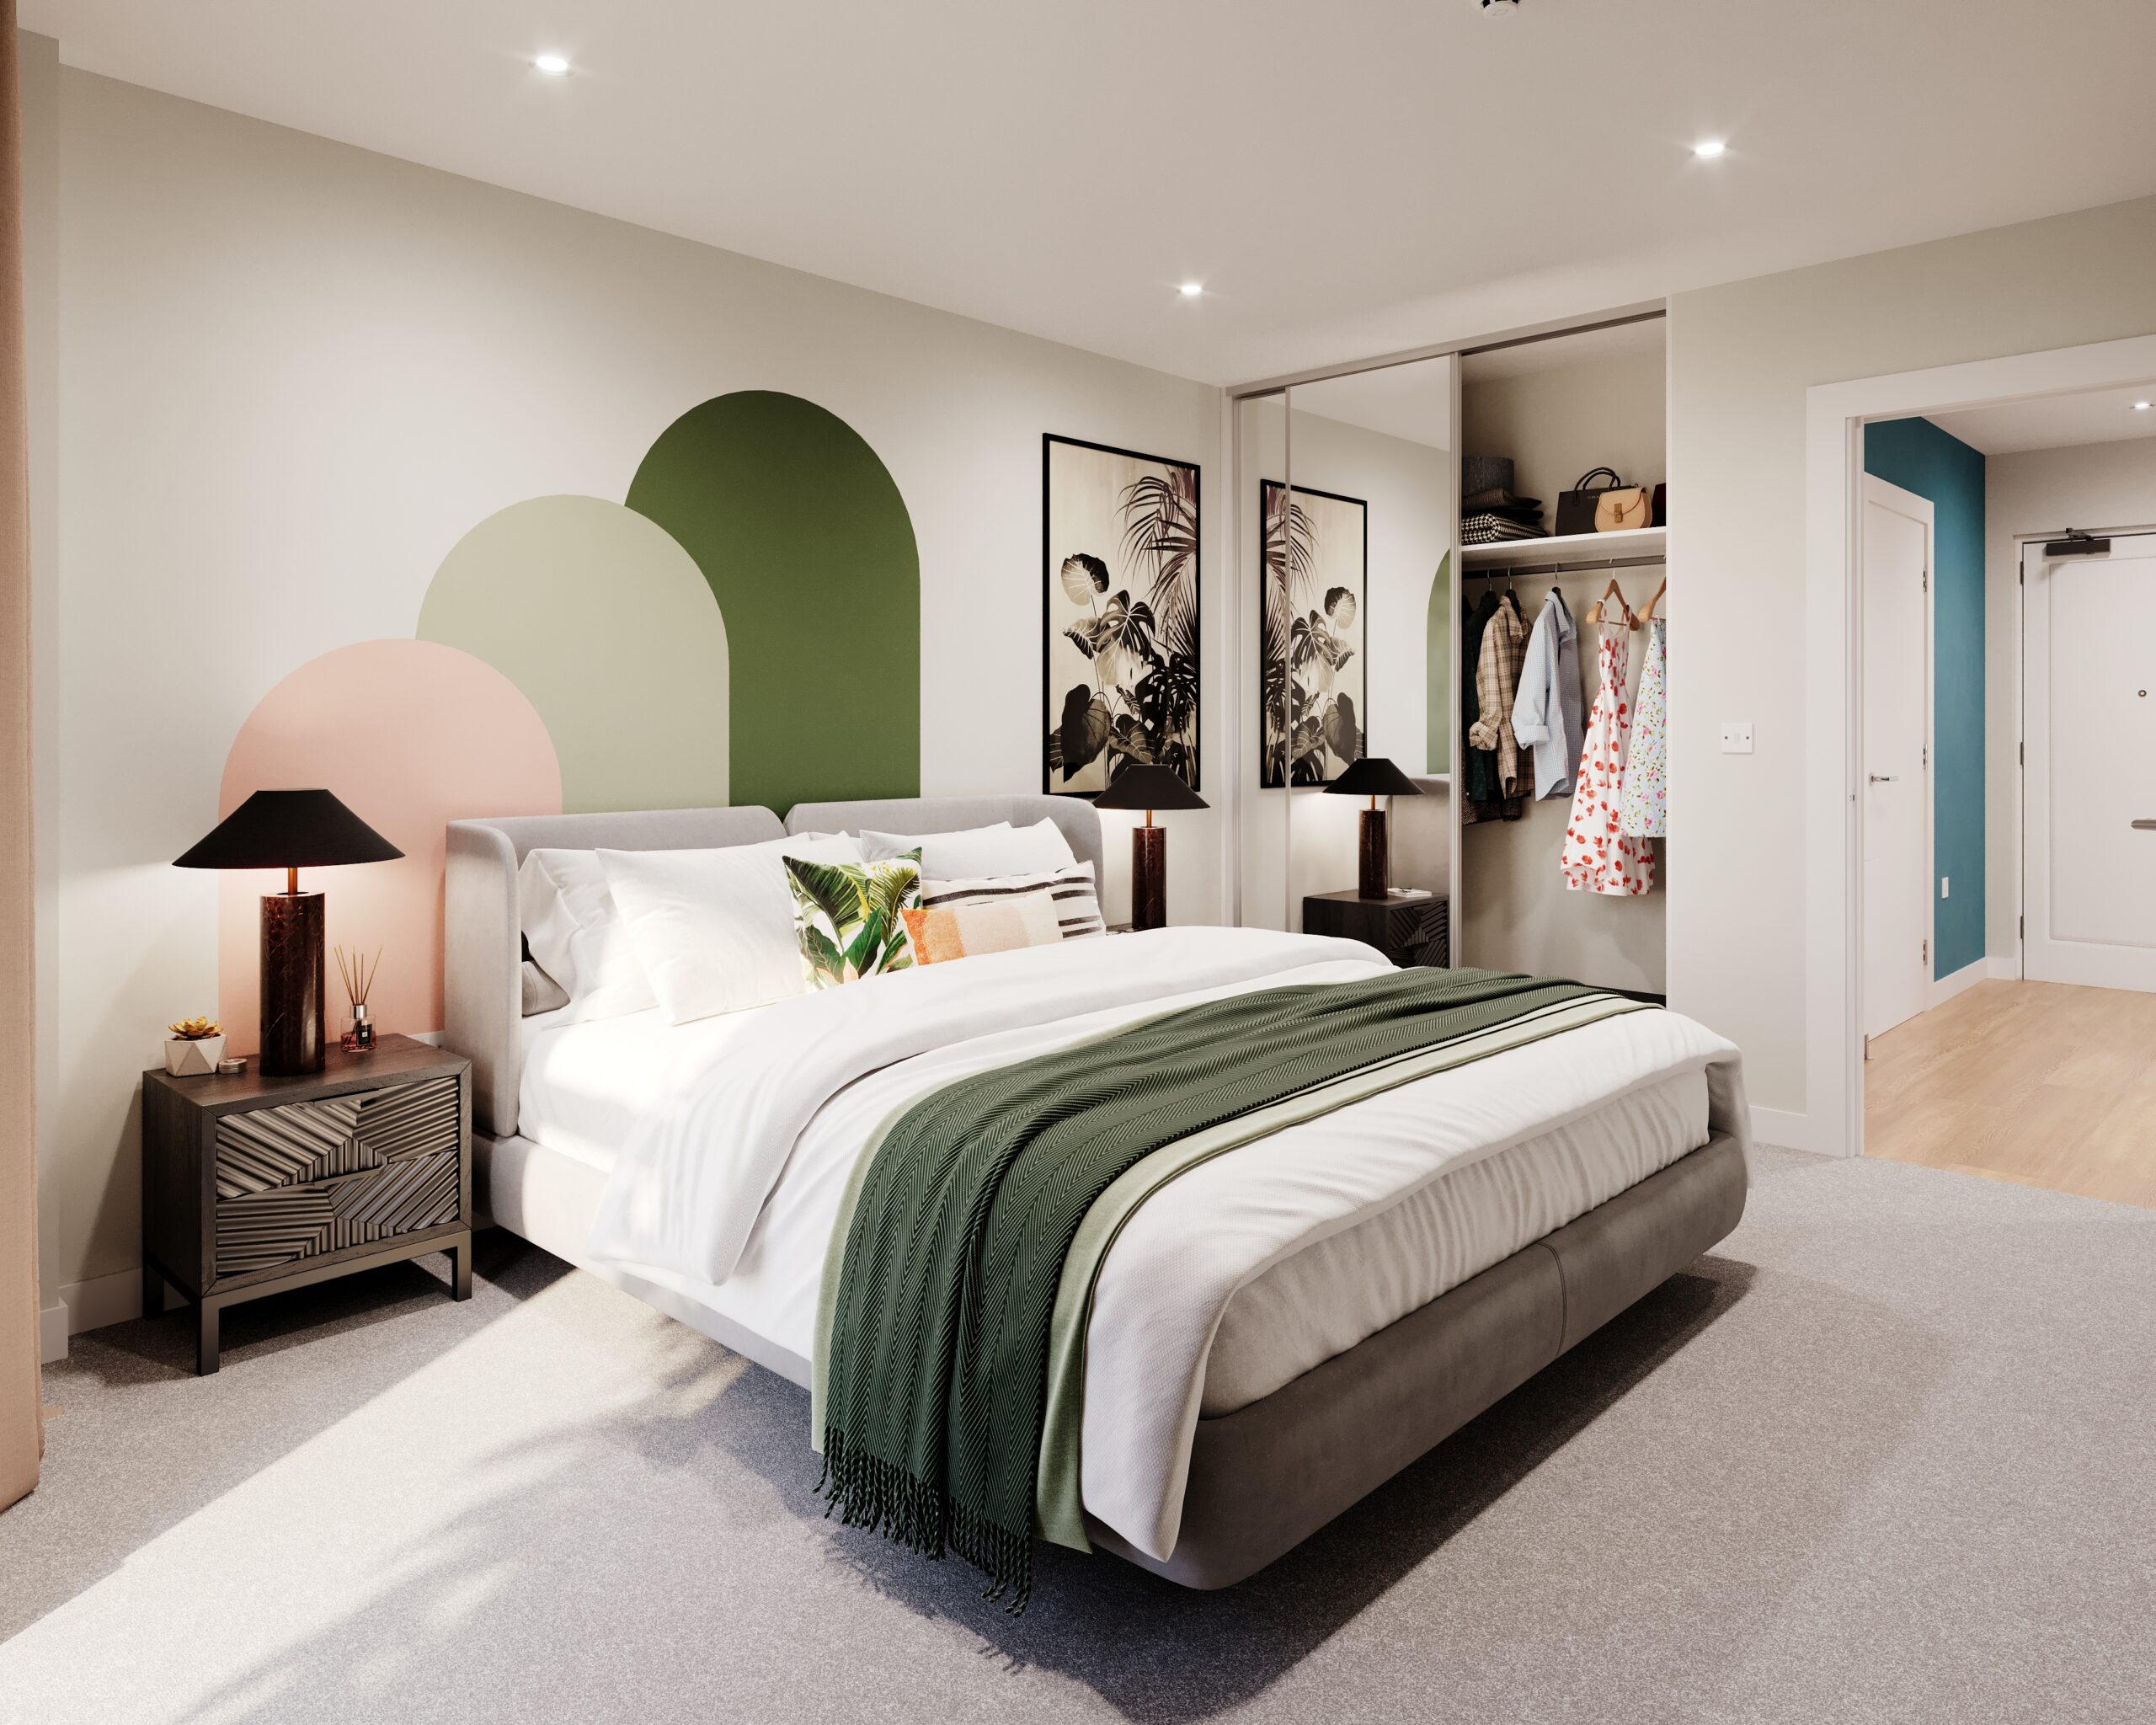 An image of a bedroom at Kidbrooke Square by Notting Hill Genesis - available to purchase through Shared Ownership on Share to Buy!